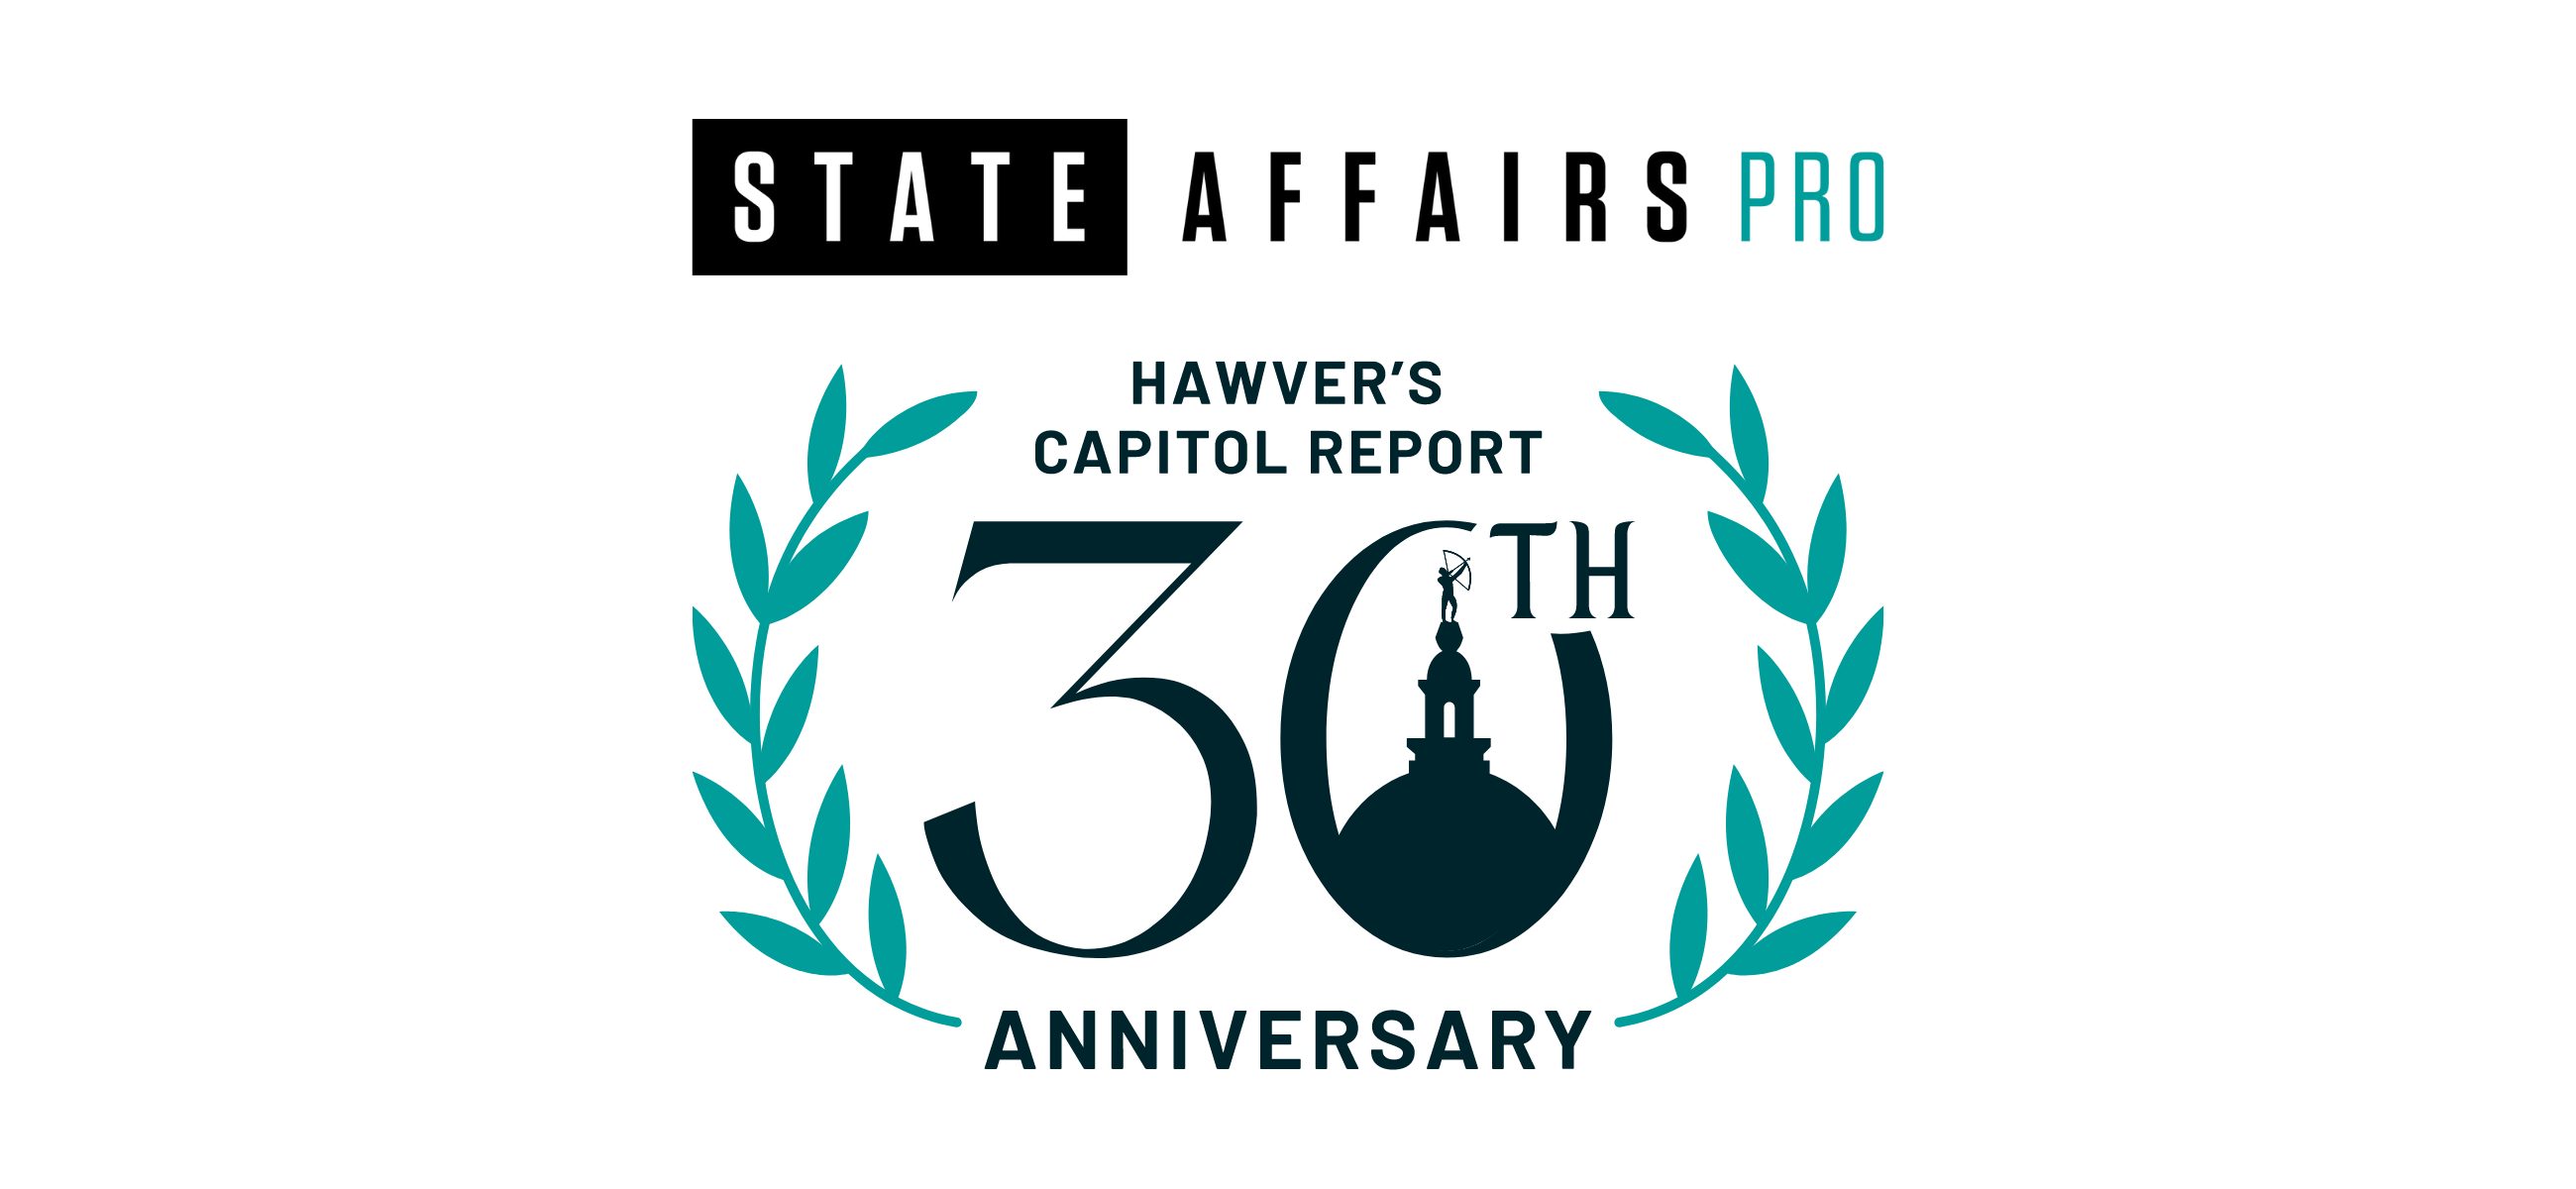 Hawver's Capitol Report 30th Anniversary Edition